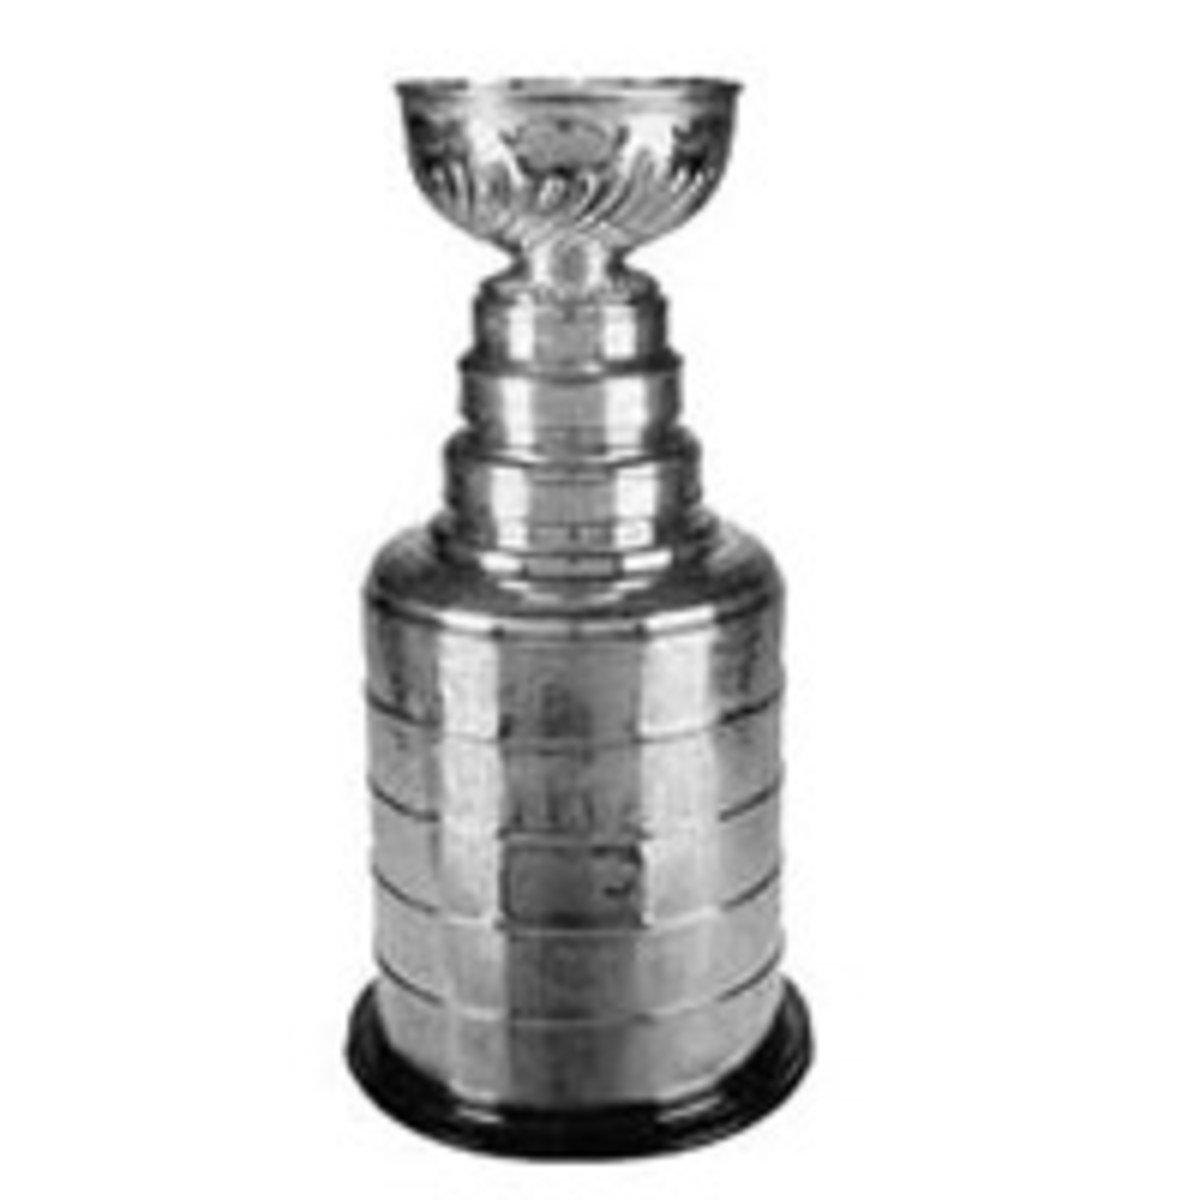 Why the Newest Stanley Cups Sold Out in Mere Minutes - LAmag